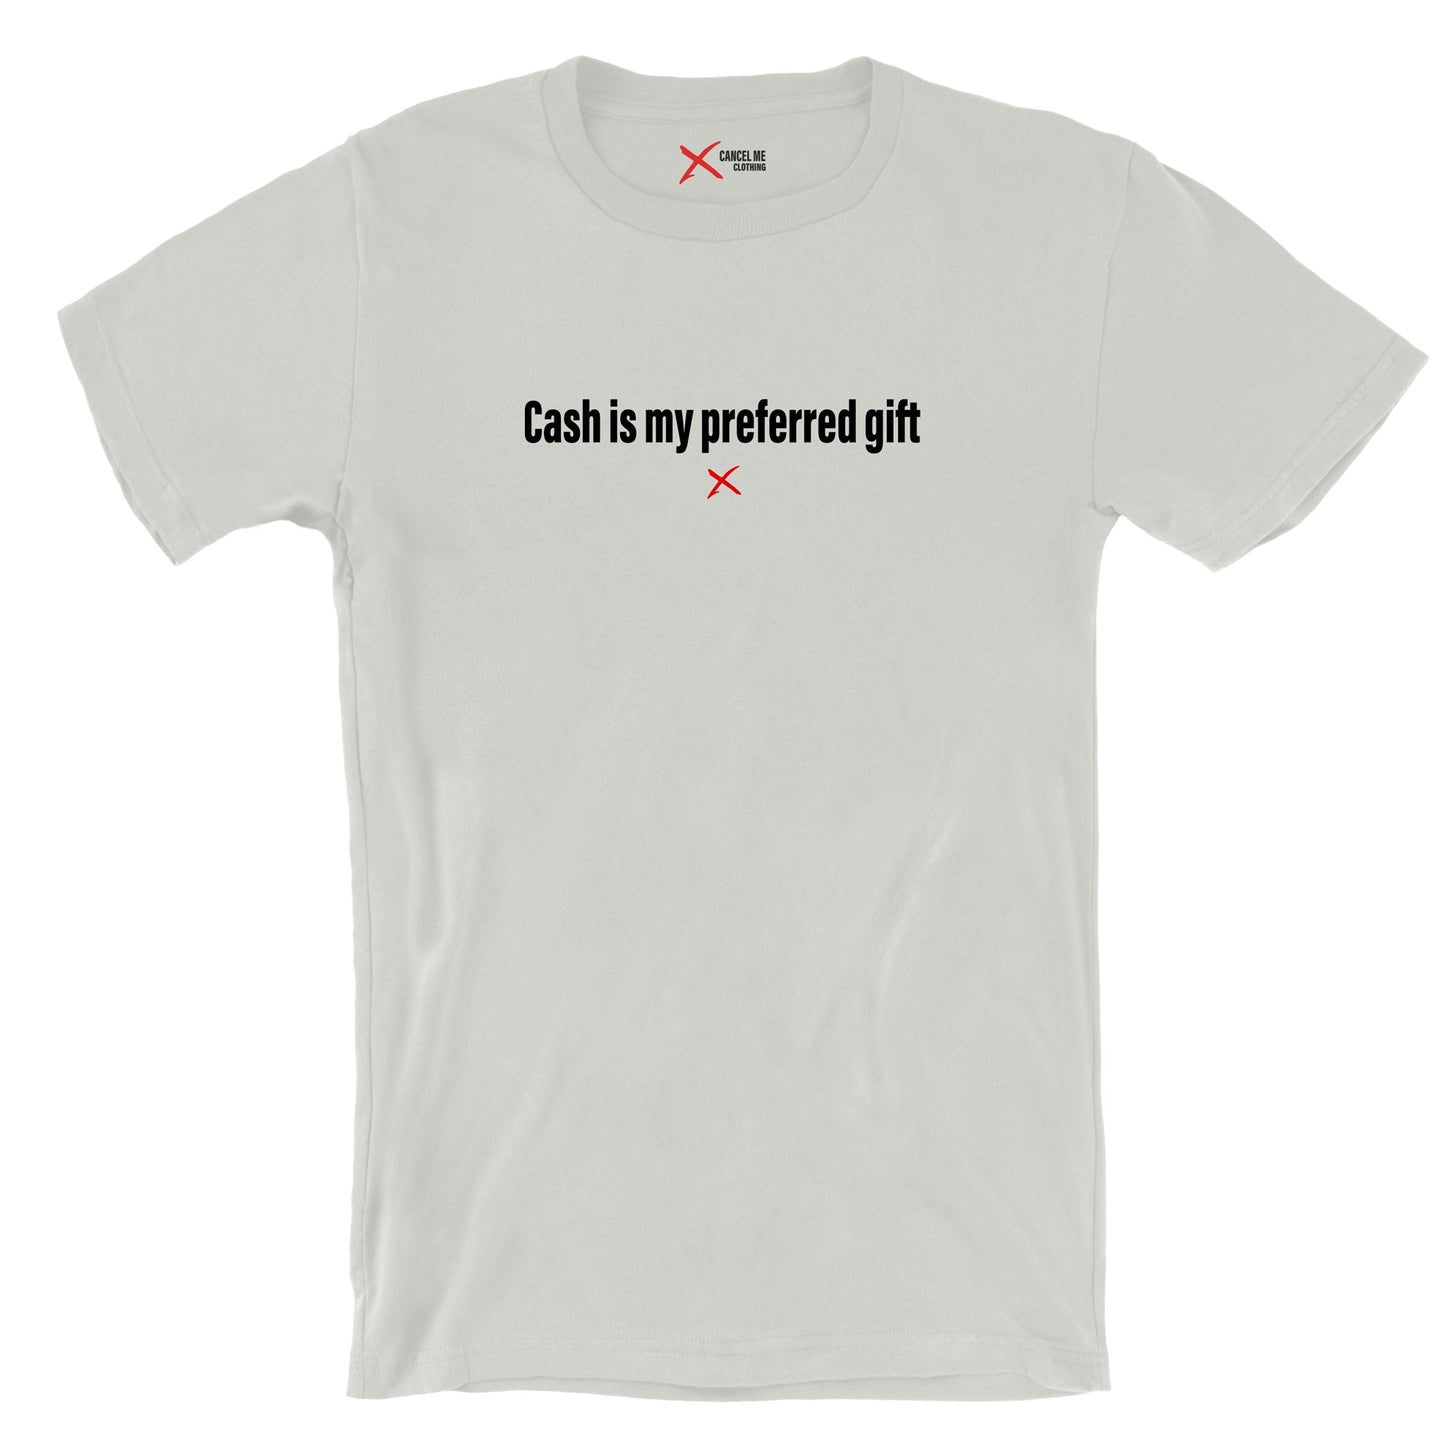 Cash is my preferred gift - Shirt